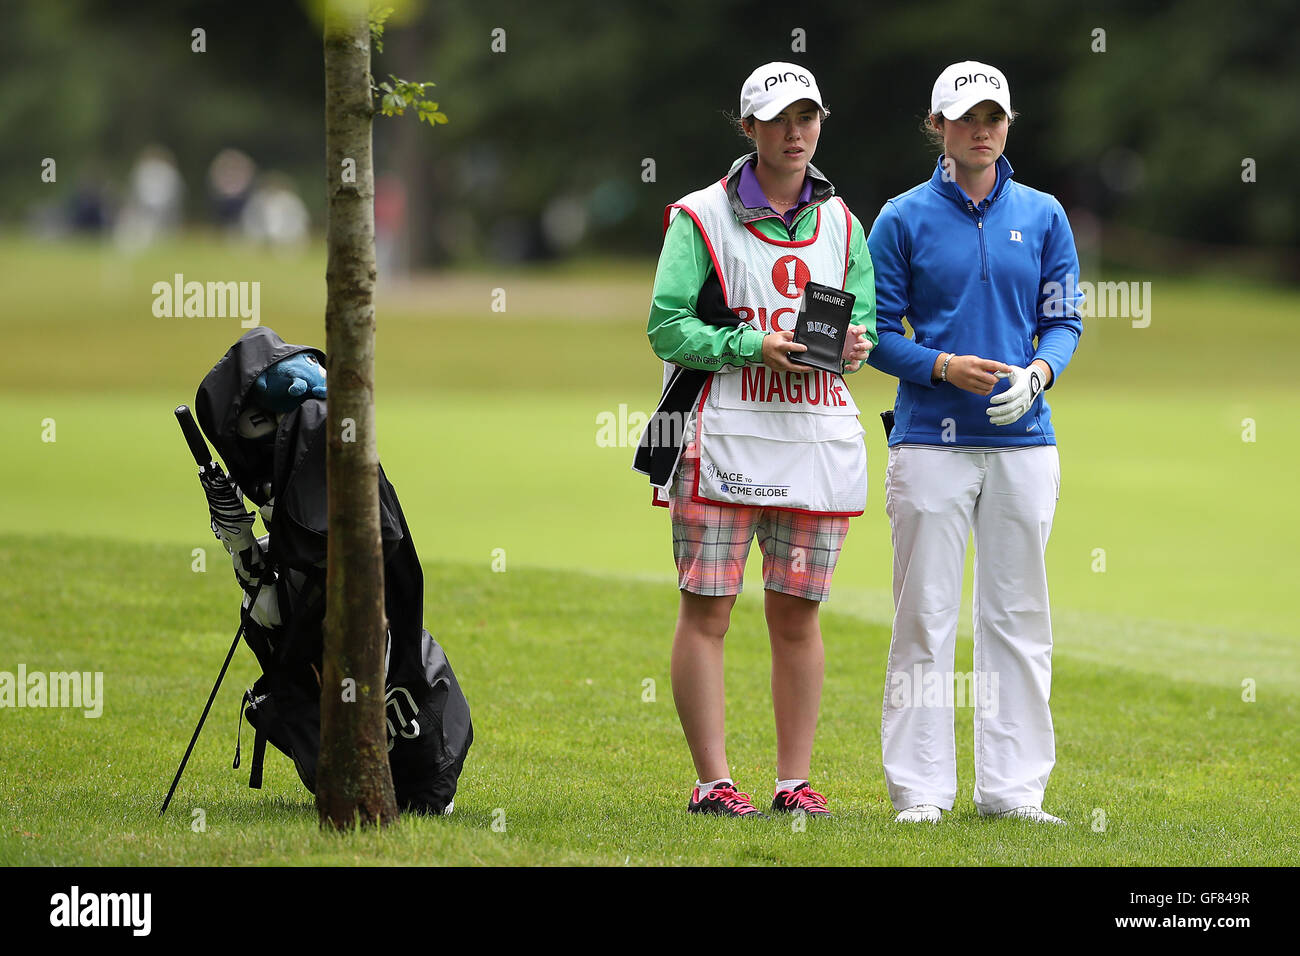 Republic of Ireland's Leona Maguire (right) with twin sister Lisa as her  caddy during day two of the Ricoh Women's British Open at Woburn Golf Club  Stock Photo - Alamy